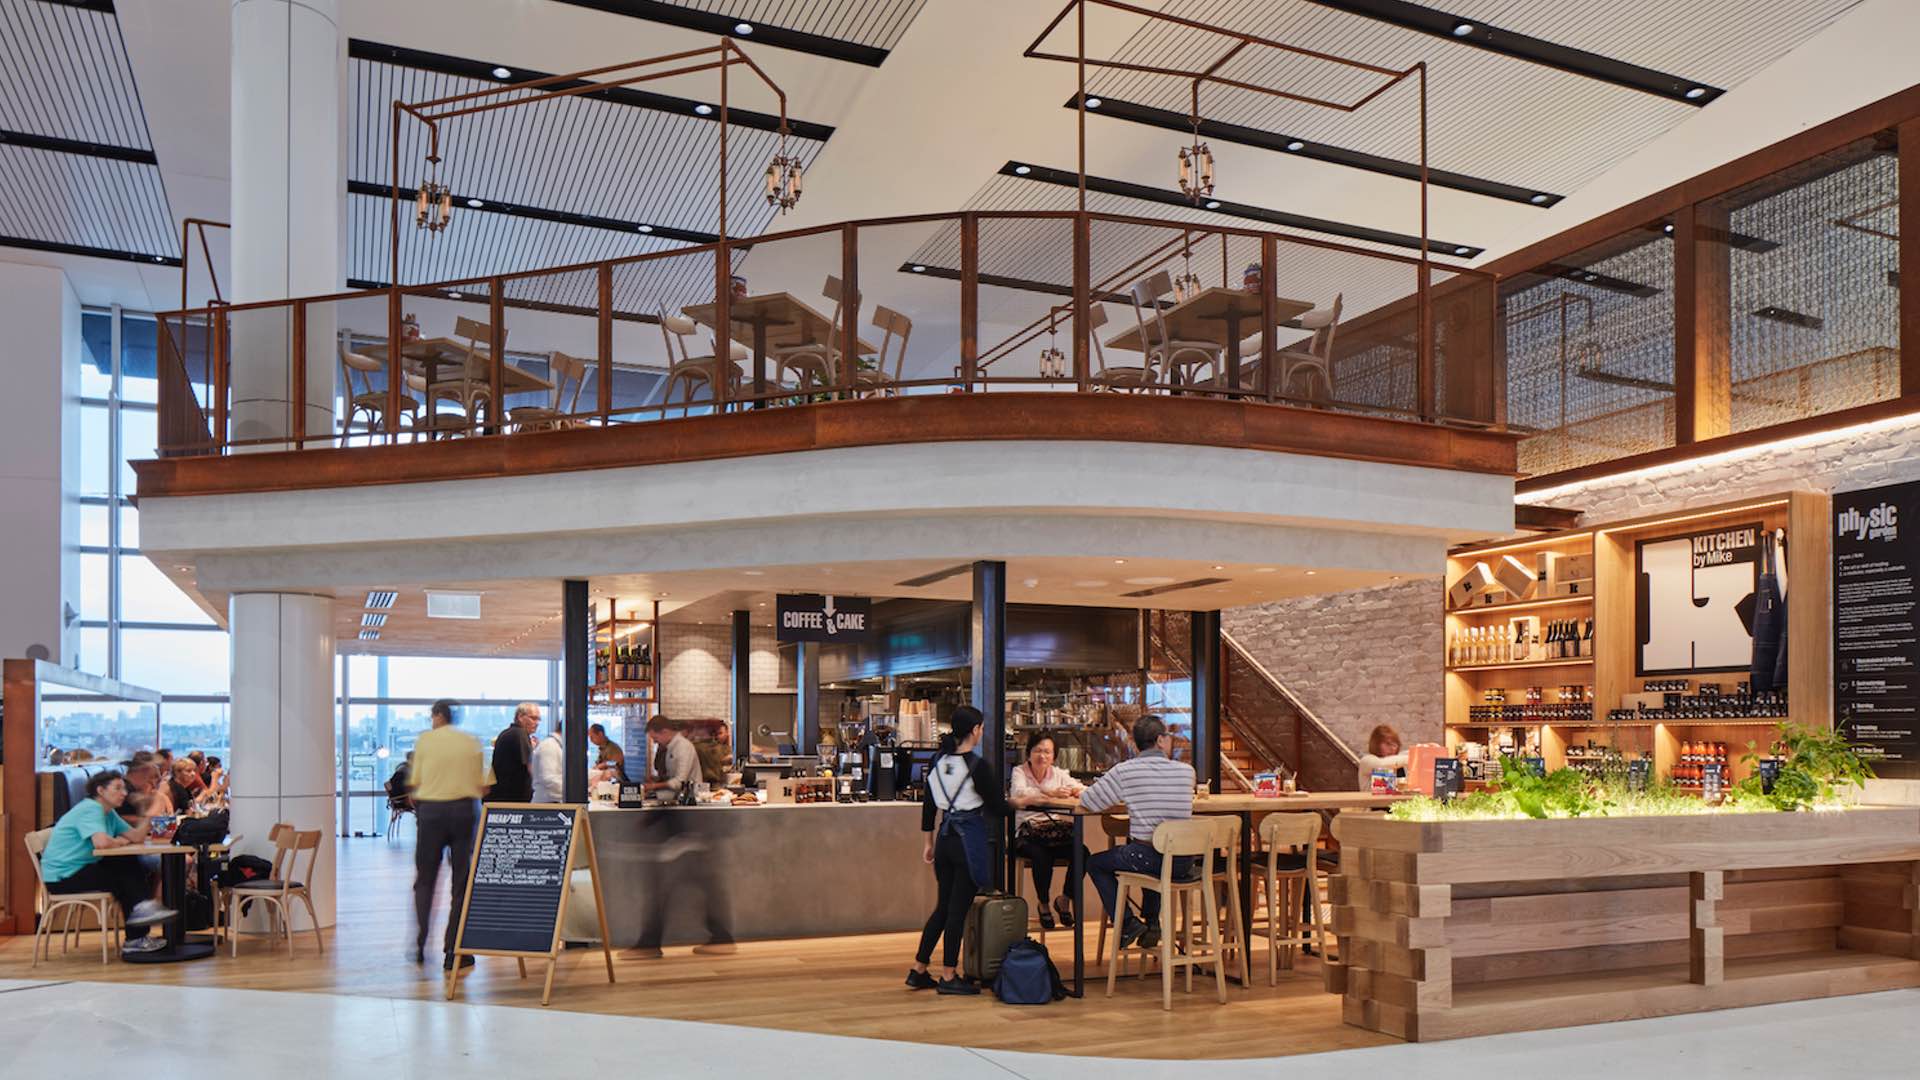 Kitchen By Mike's New Canteen Opens at Sydney International Airport